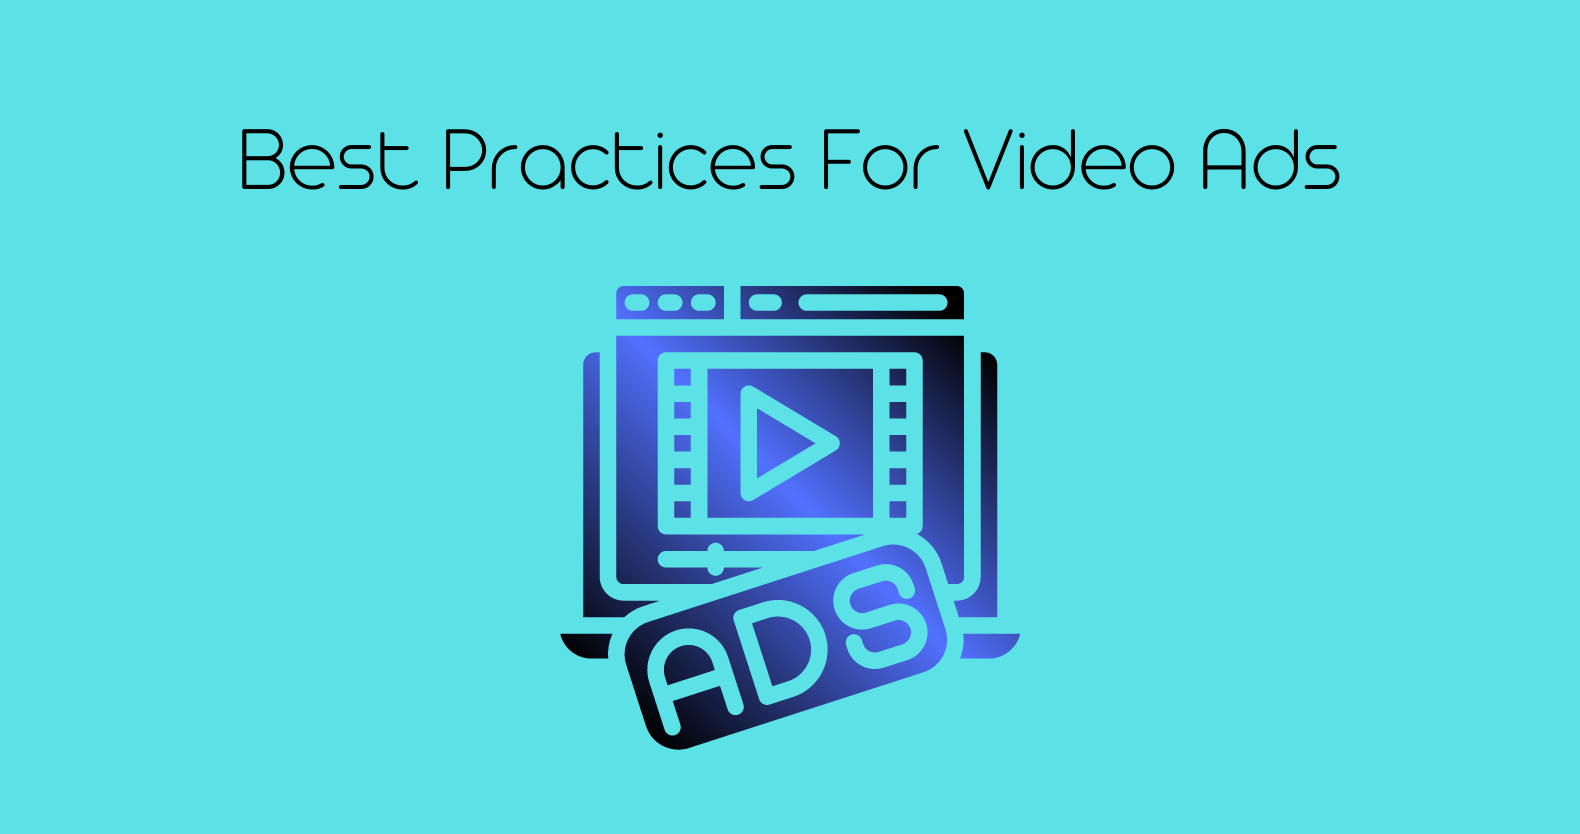 Best Practices For Video Ads